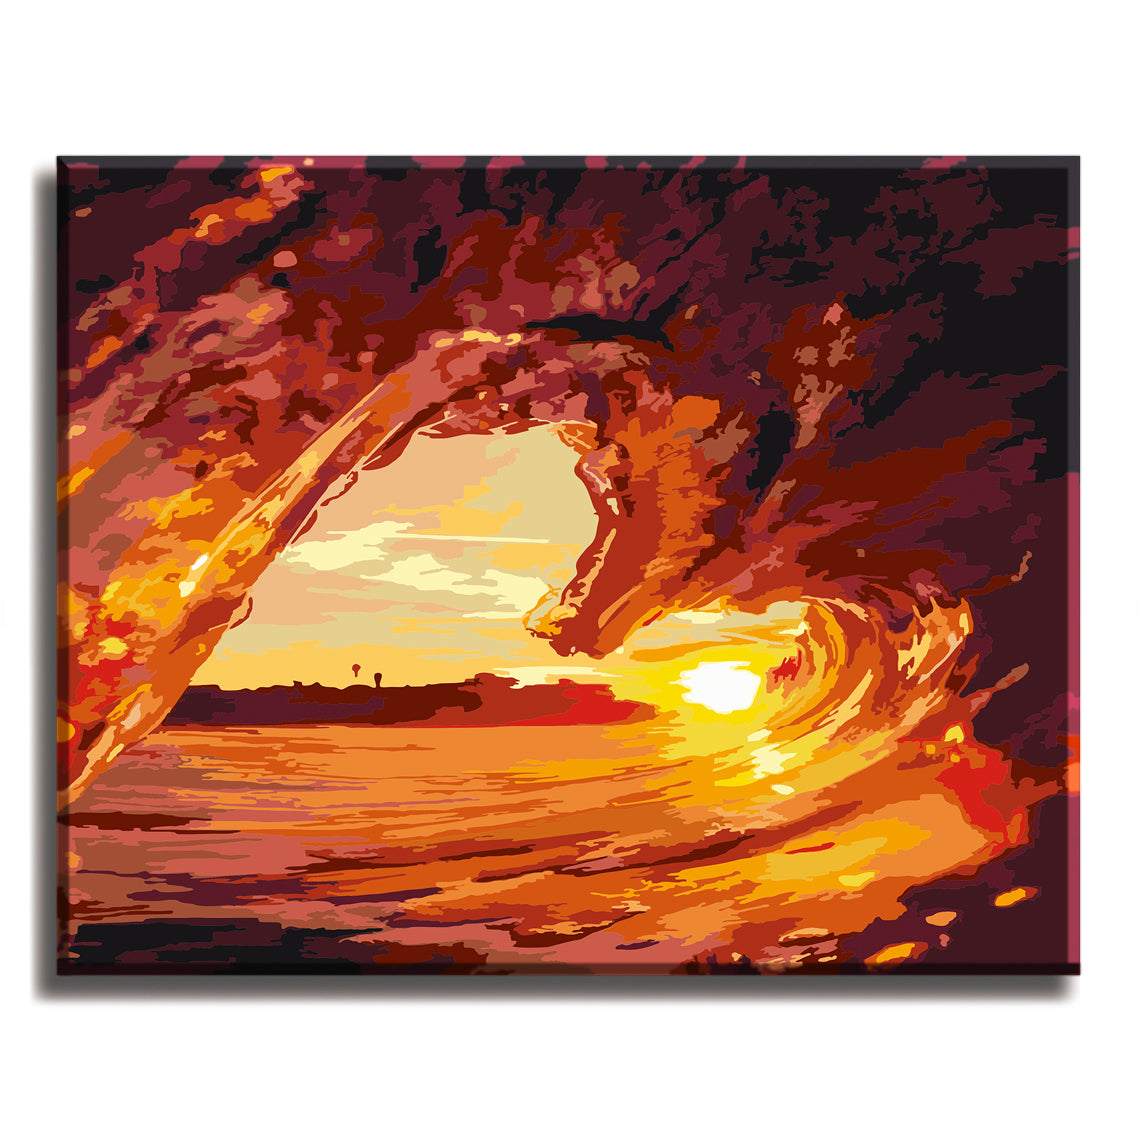 Diy Digital Painting For Beginners, Adult Canvas Reflection Oil